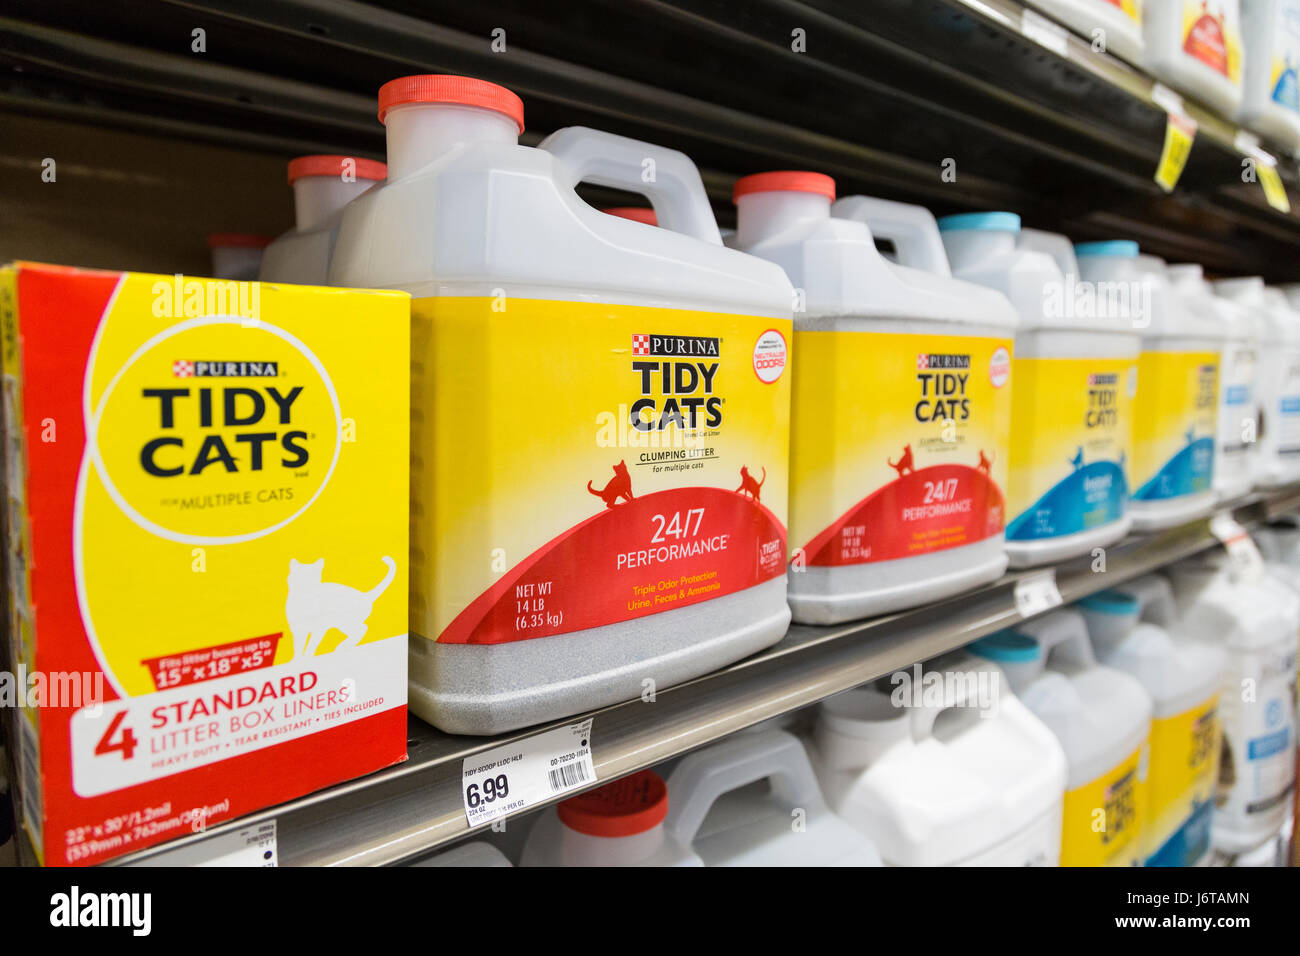 plastic containers of Purina Tidy Cats brand cat litter on the shelf of a grocery store Stock Photo